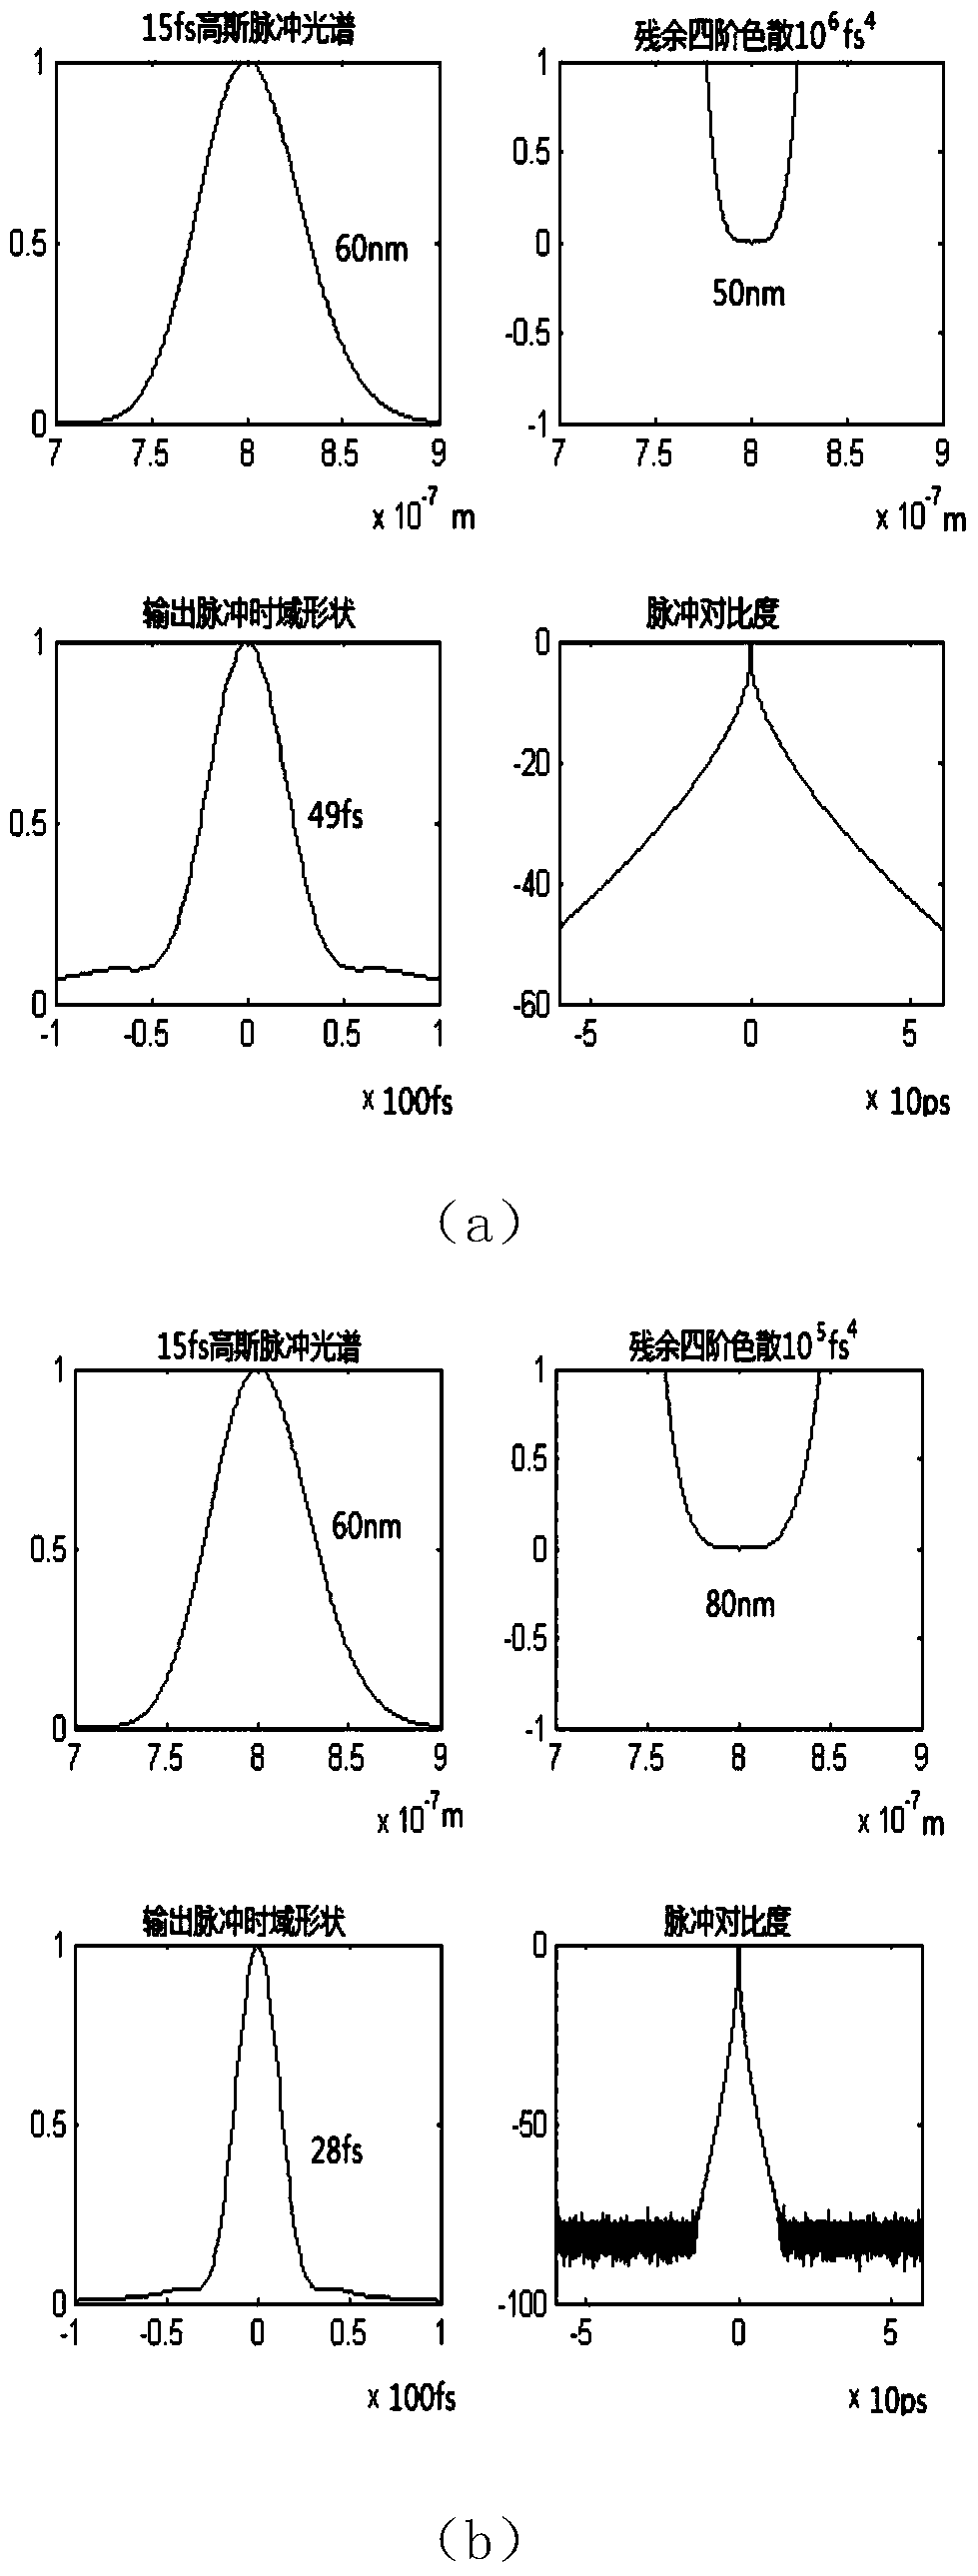 Chirped Pulse Stretching, Compression and Amplification System with Elimination of Higher Order Dispersion